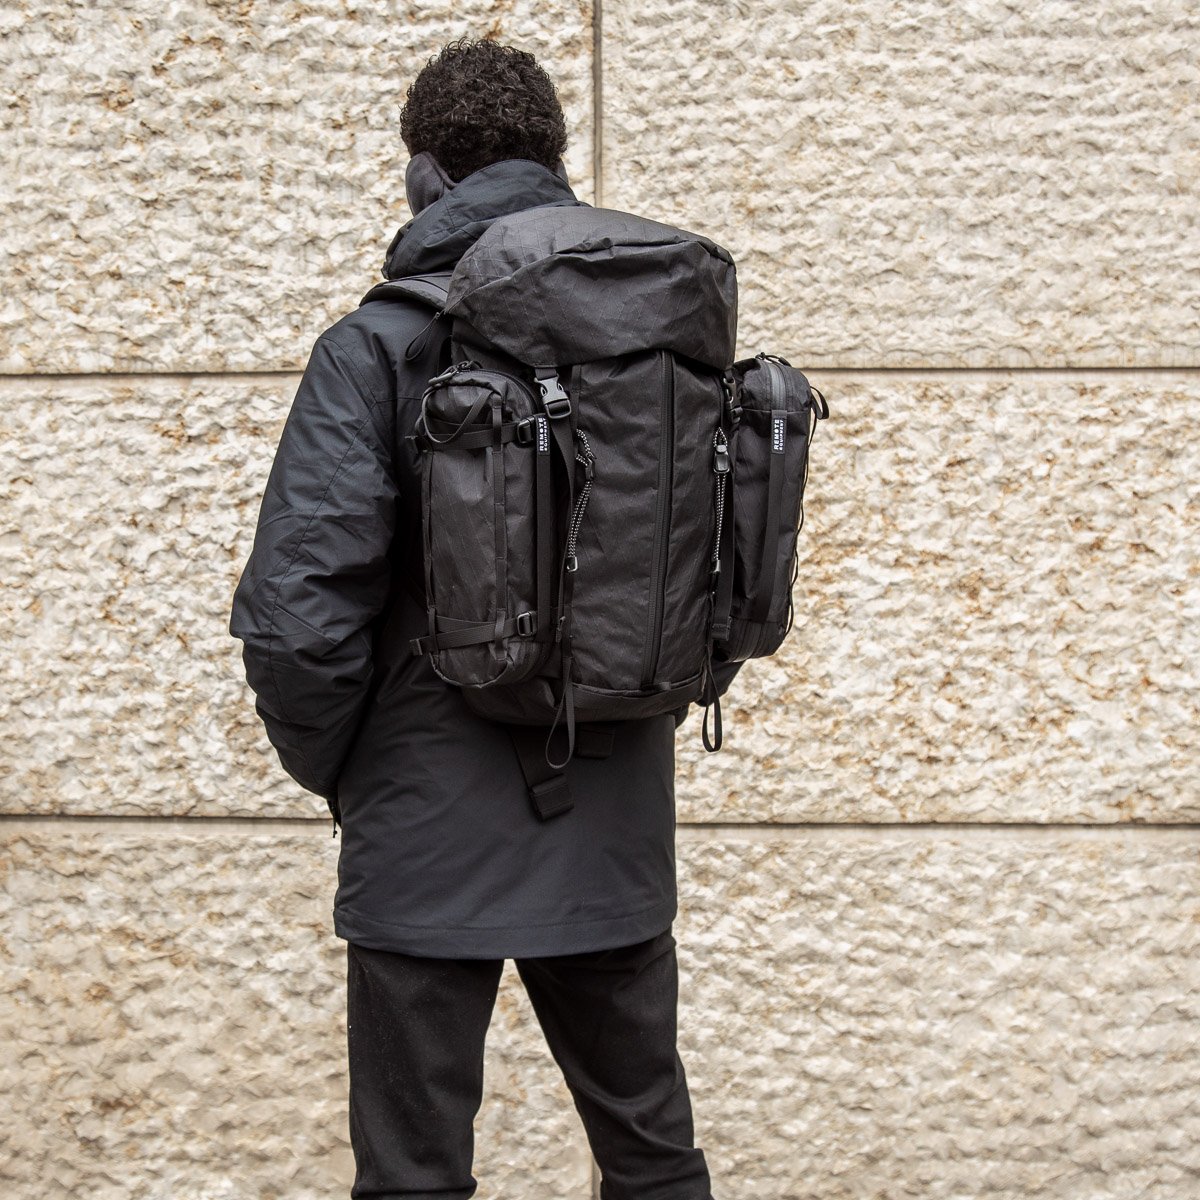 Charlie 25 - Expandable Multi-access laptop backpack - Storming Gravity